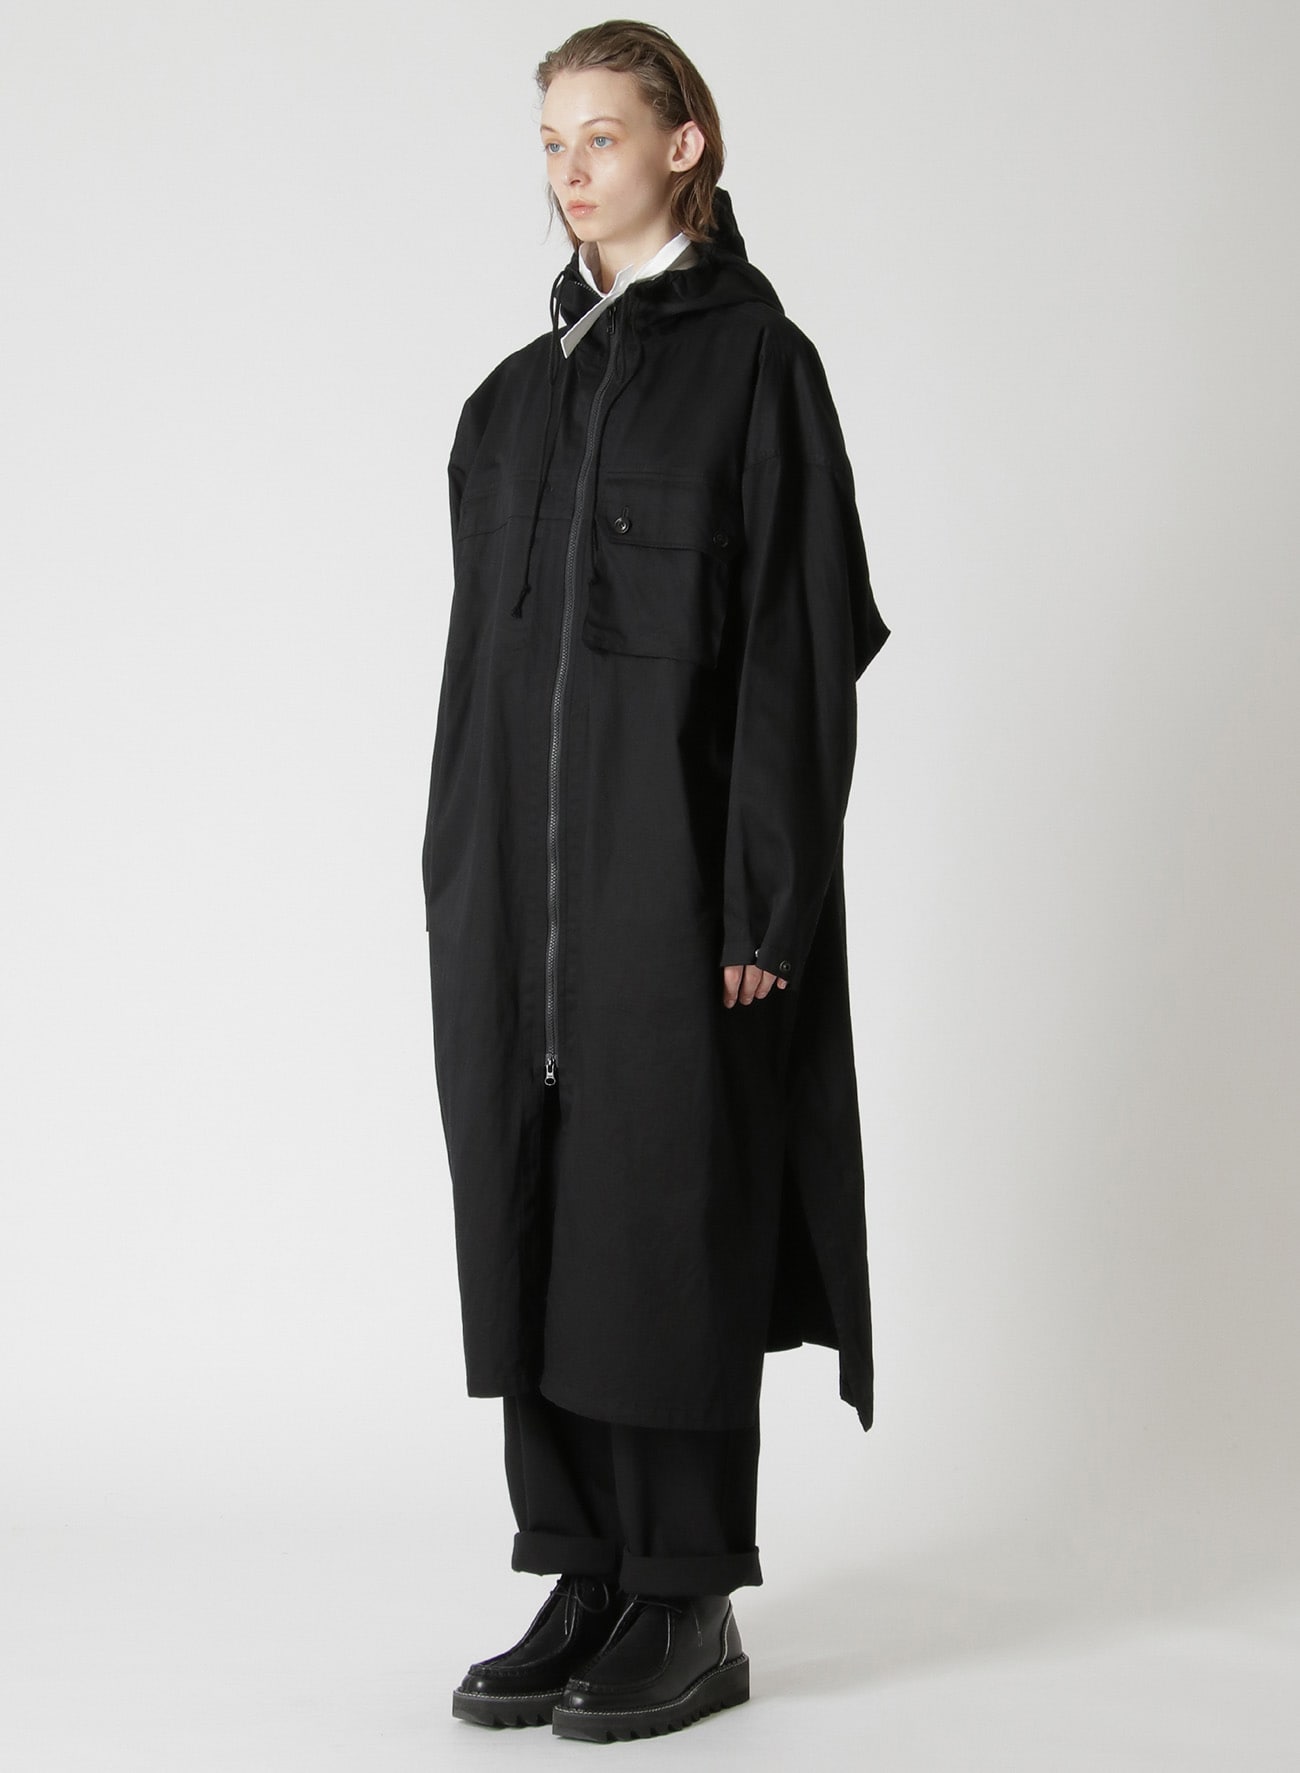 Y's BORN PRODUCT] COTTON TWILL HOODED COAT(XS BLACK): Y's|THE SHOP 